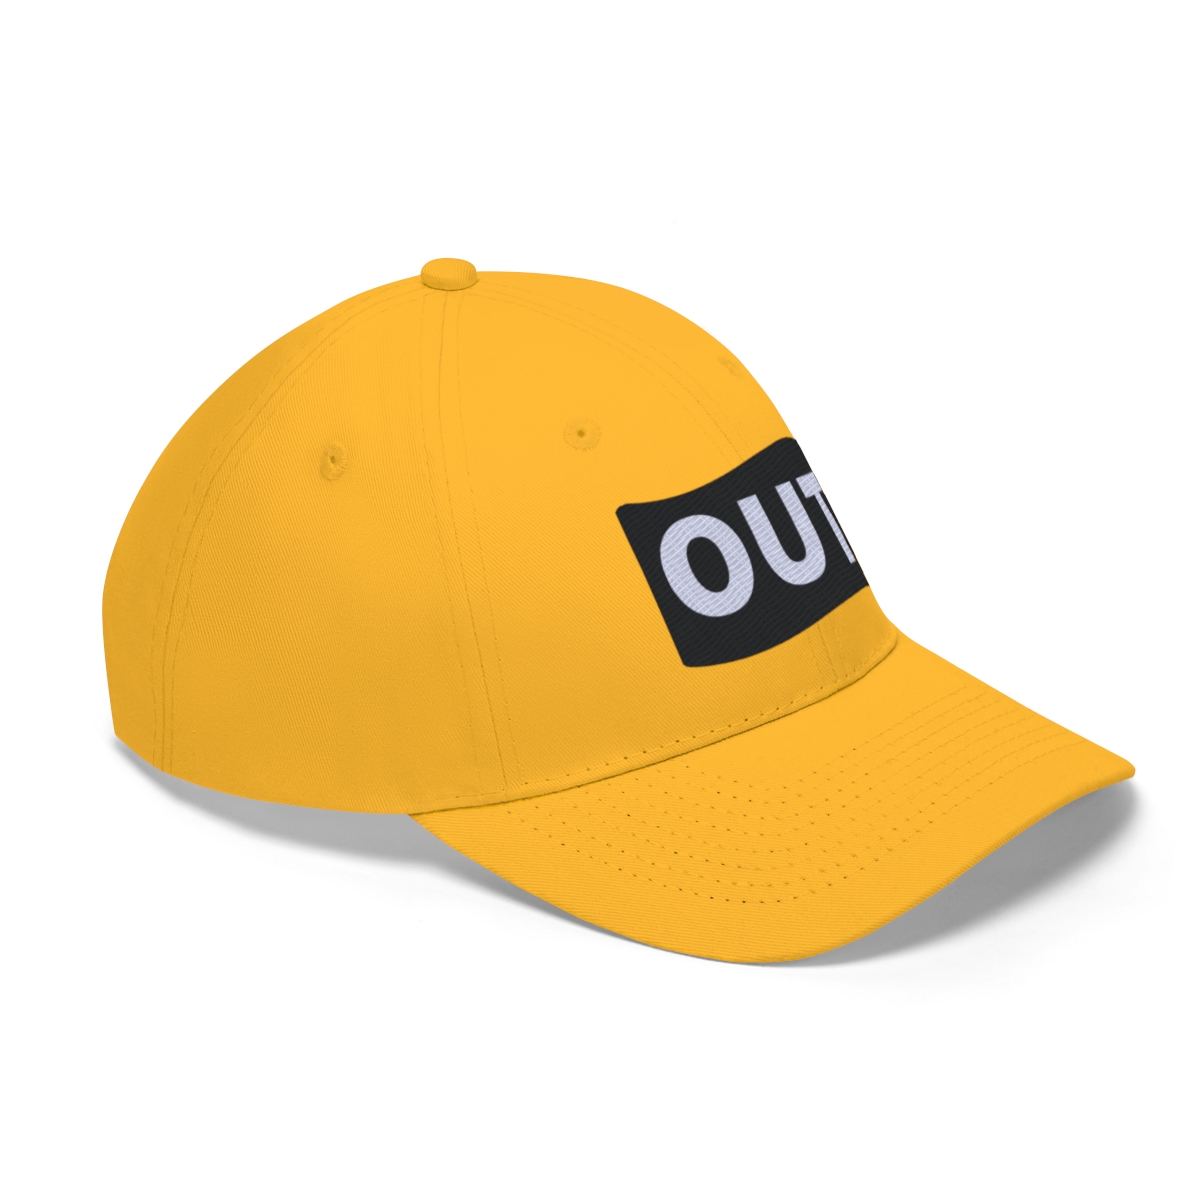 Embroidered Velcro Cap product thumbnail image